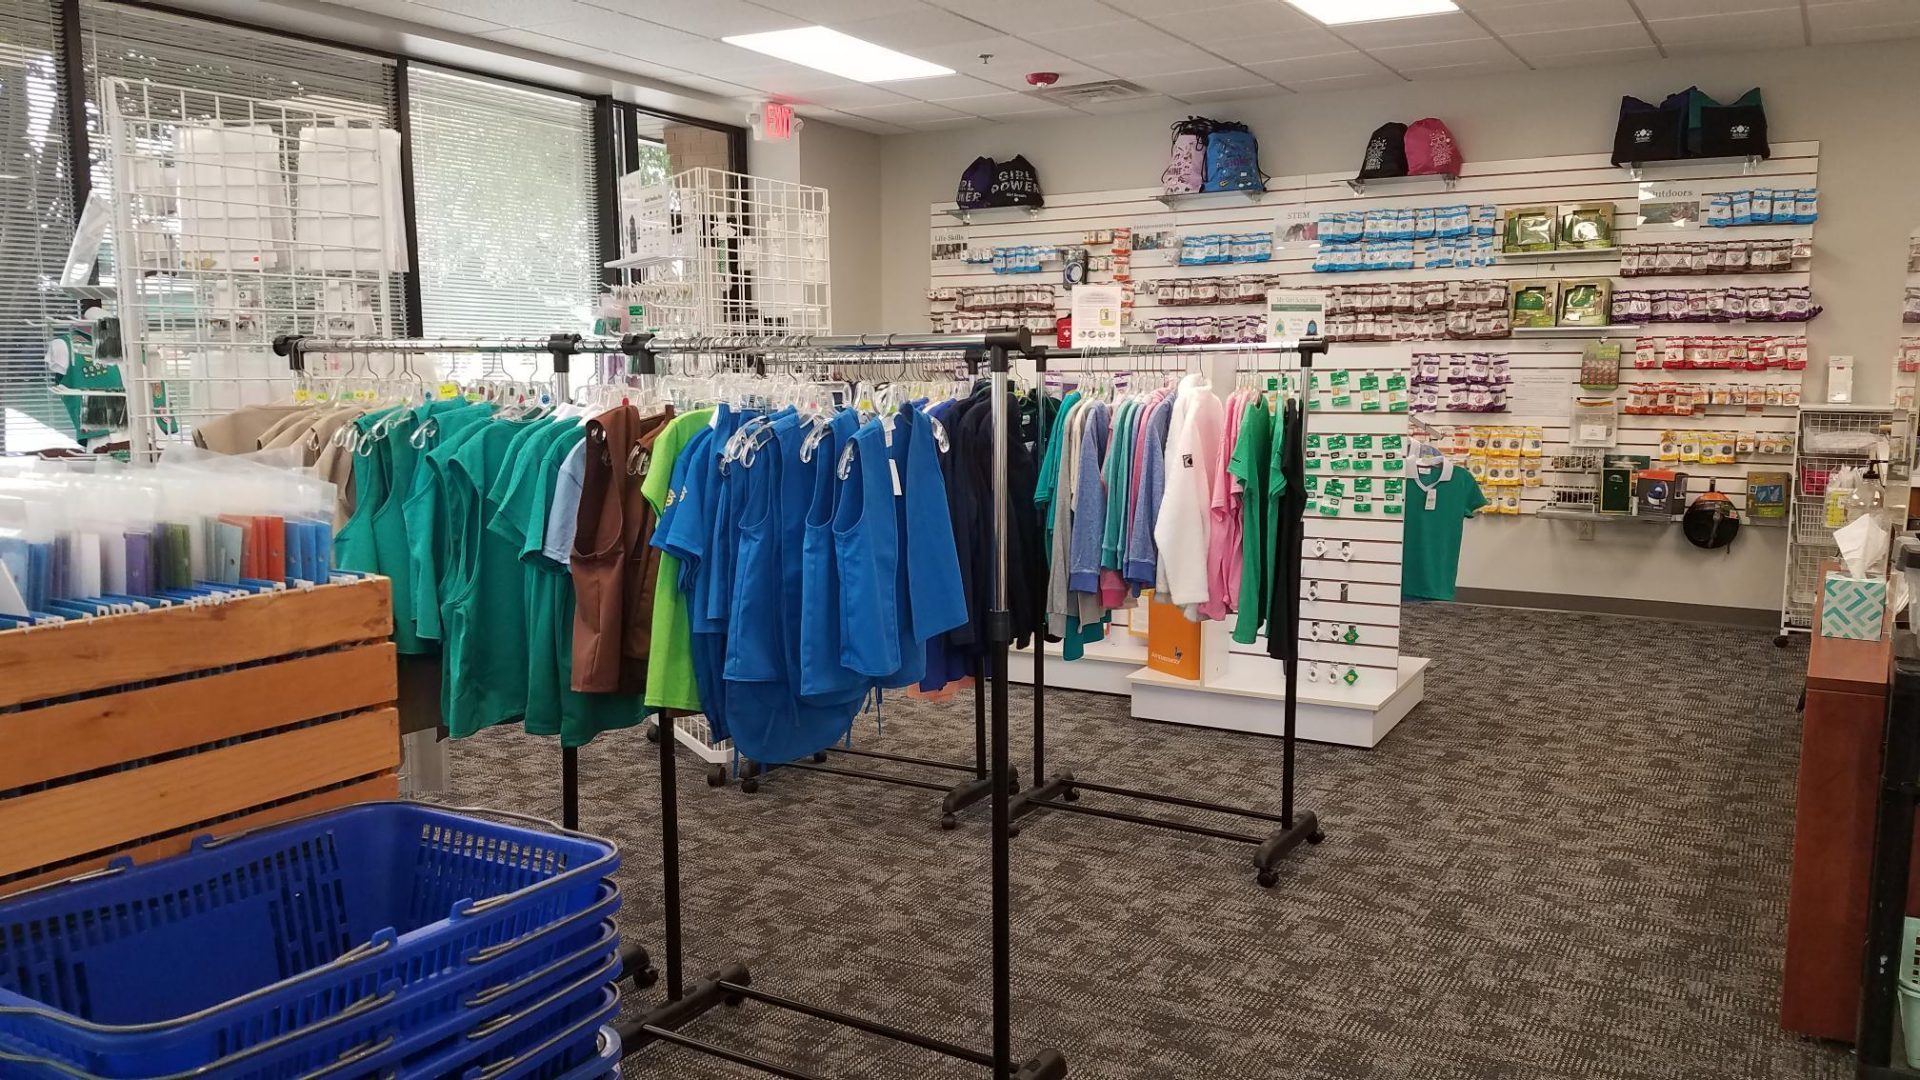  Uniforms, Badges, and fun Girl Scout gear in the Greenville Girlz Gear shop 